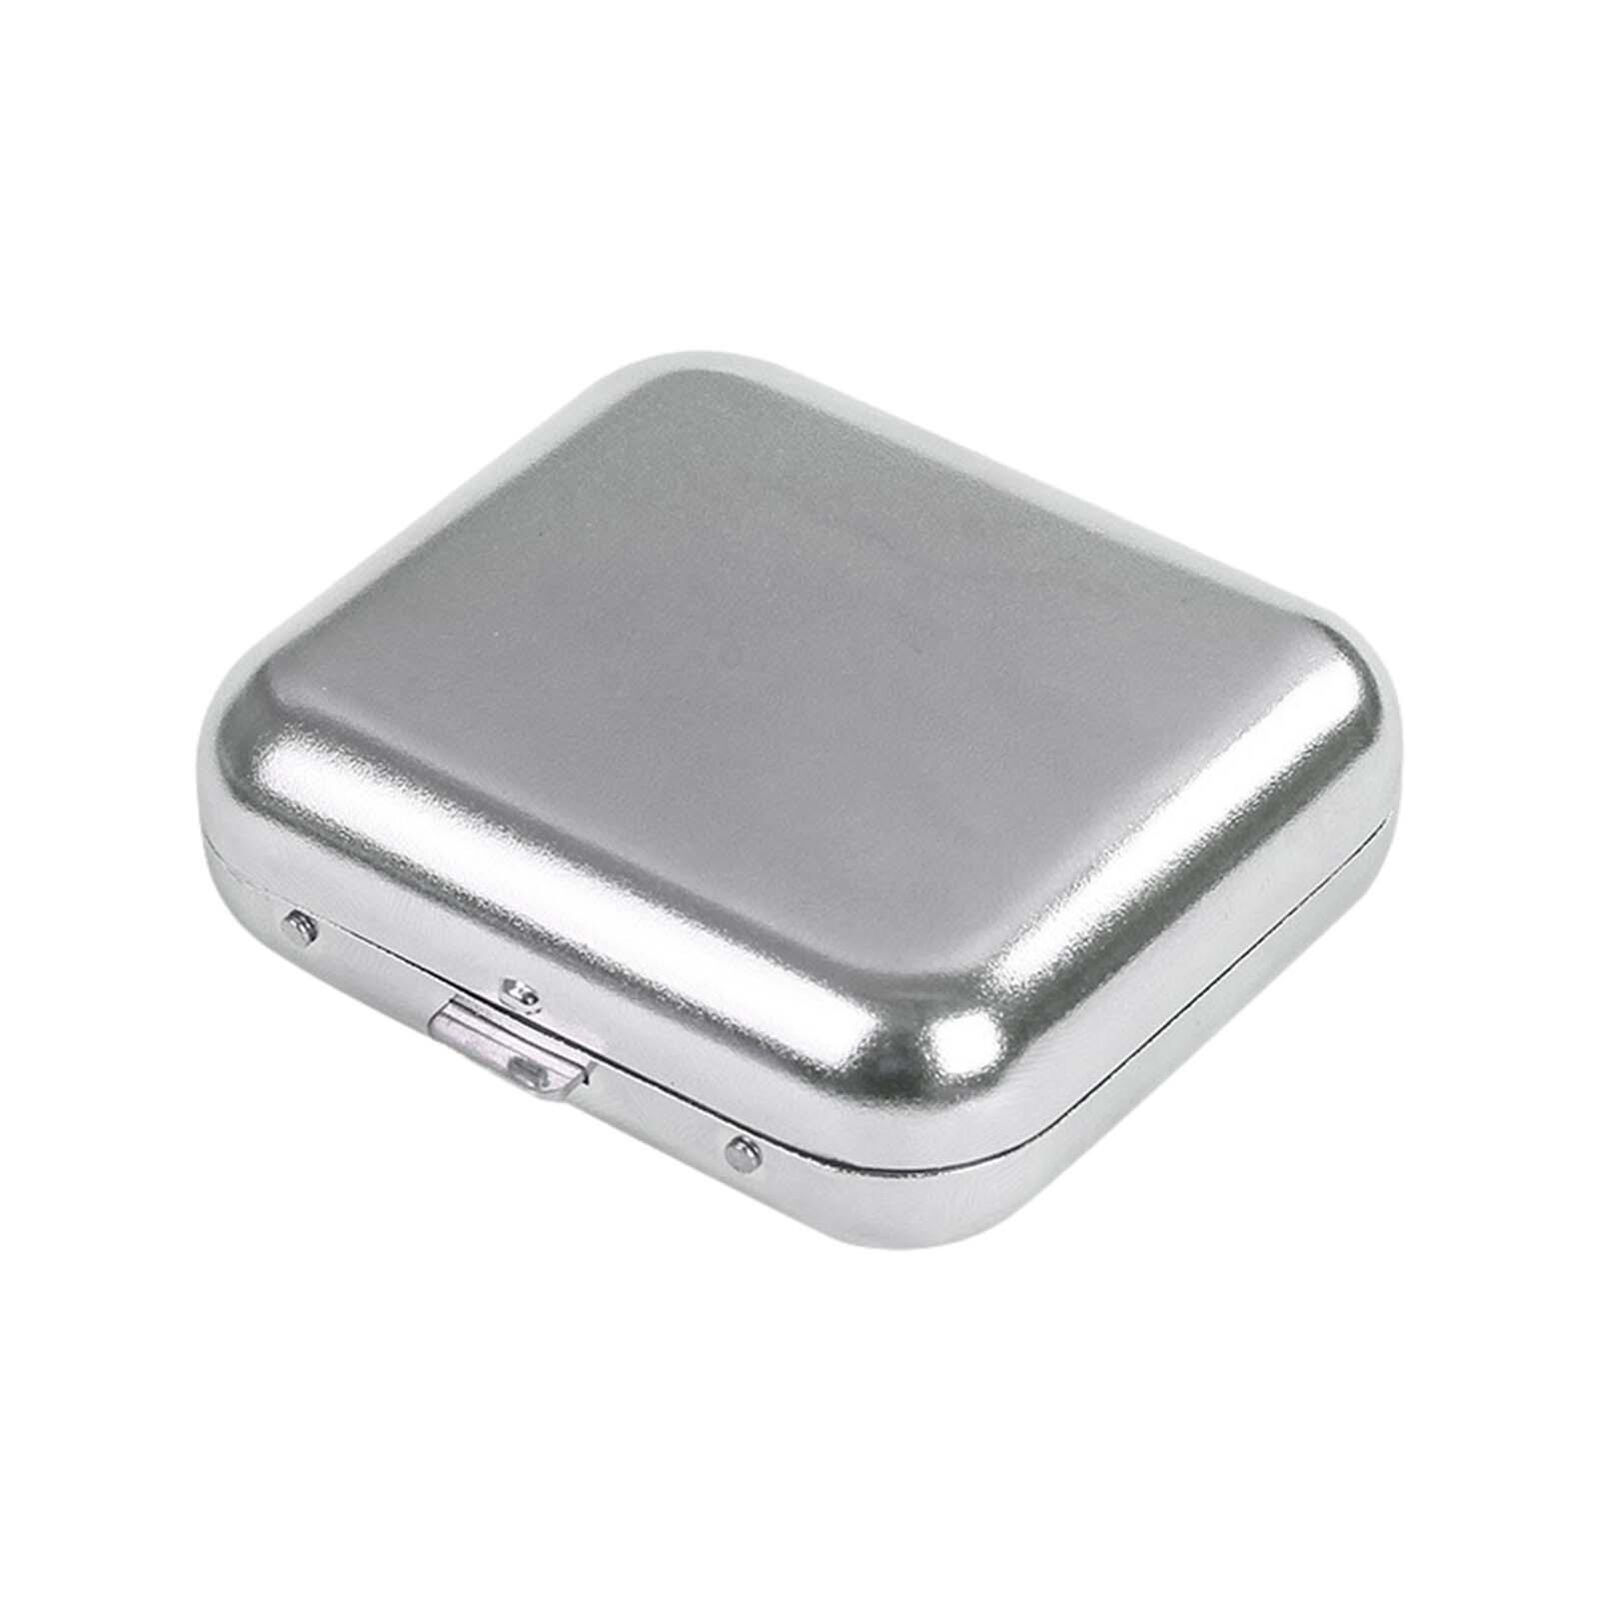 Miniature Stainless Steel Pocket Ashtray Or Snap Travel Cigarette Case With Lid